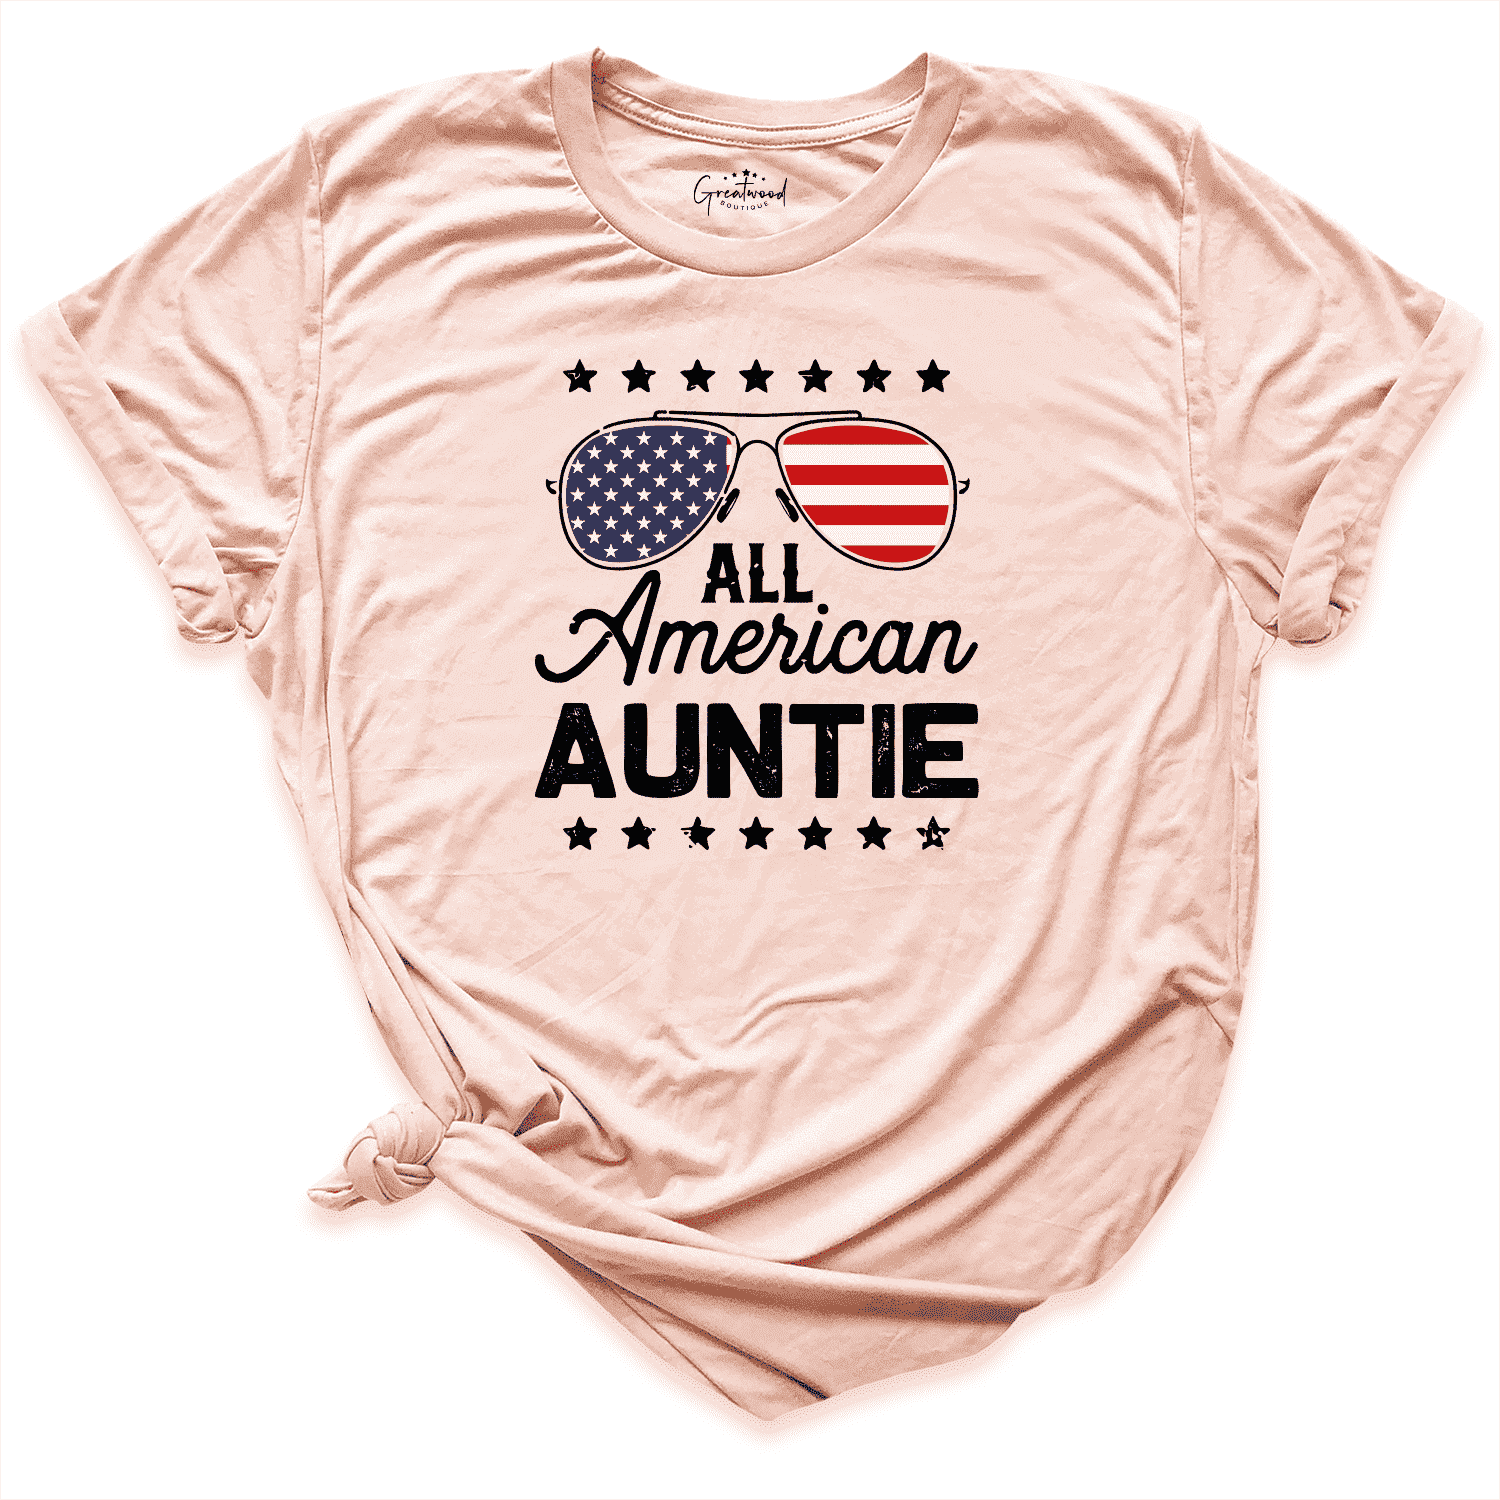 All American Auntie Shirt Peach - Greatwood Boutique